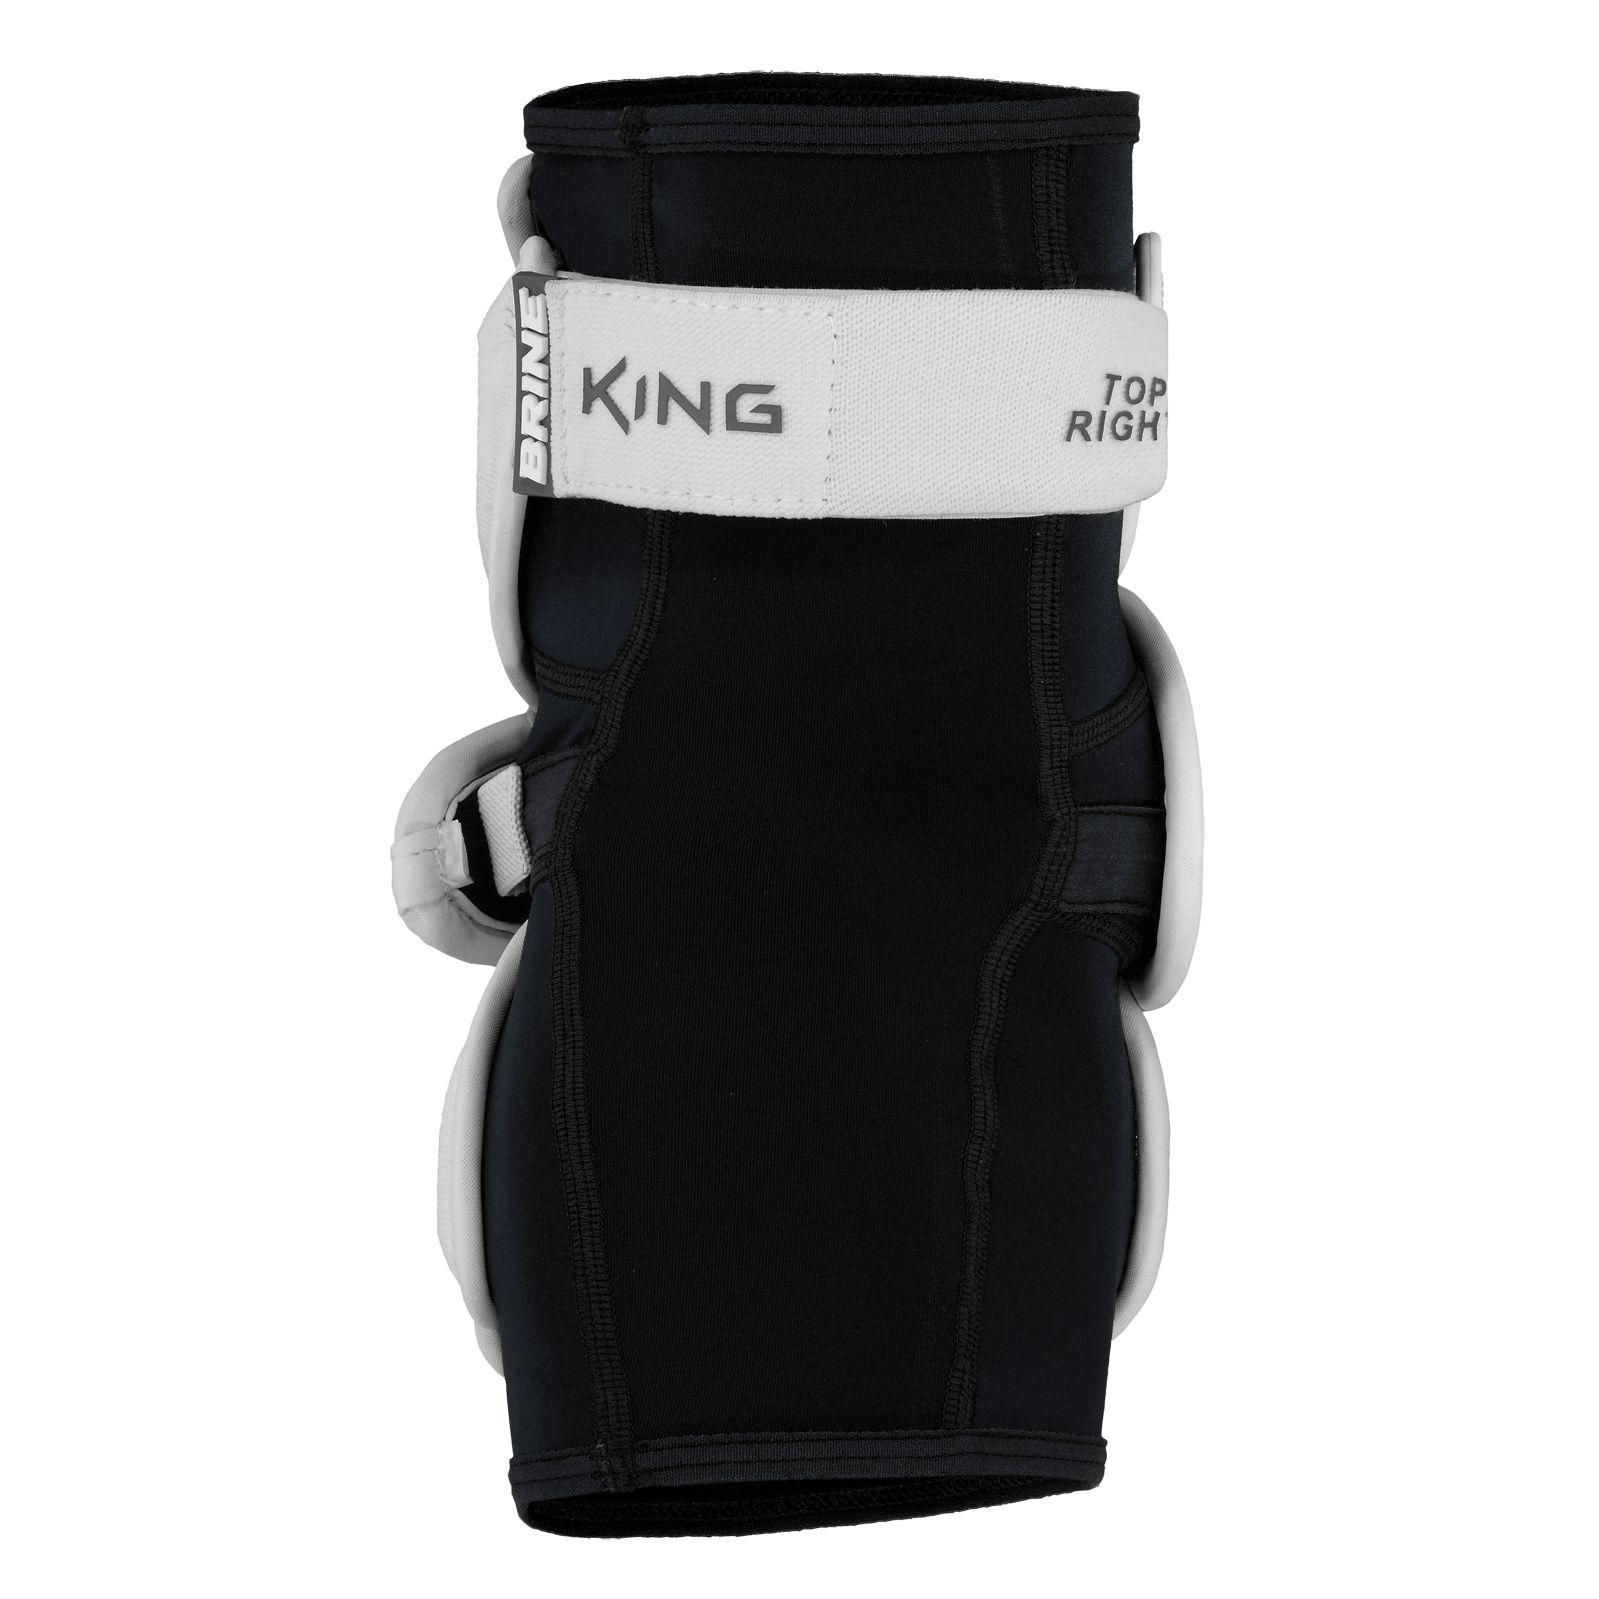 King V Arm Pad, Black with White image number 1